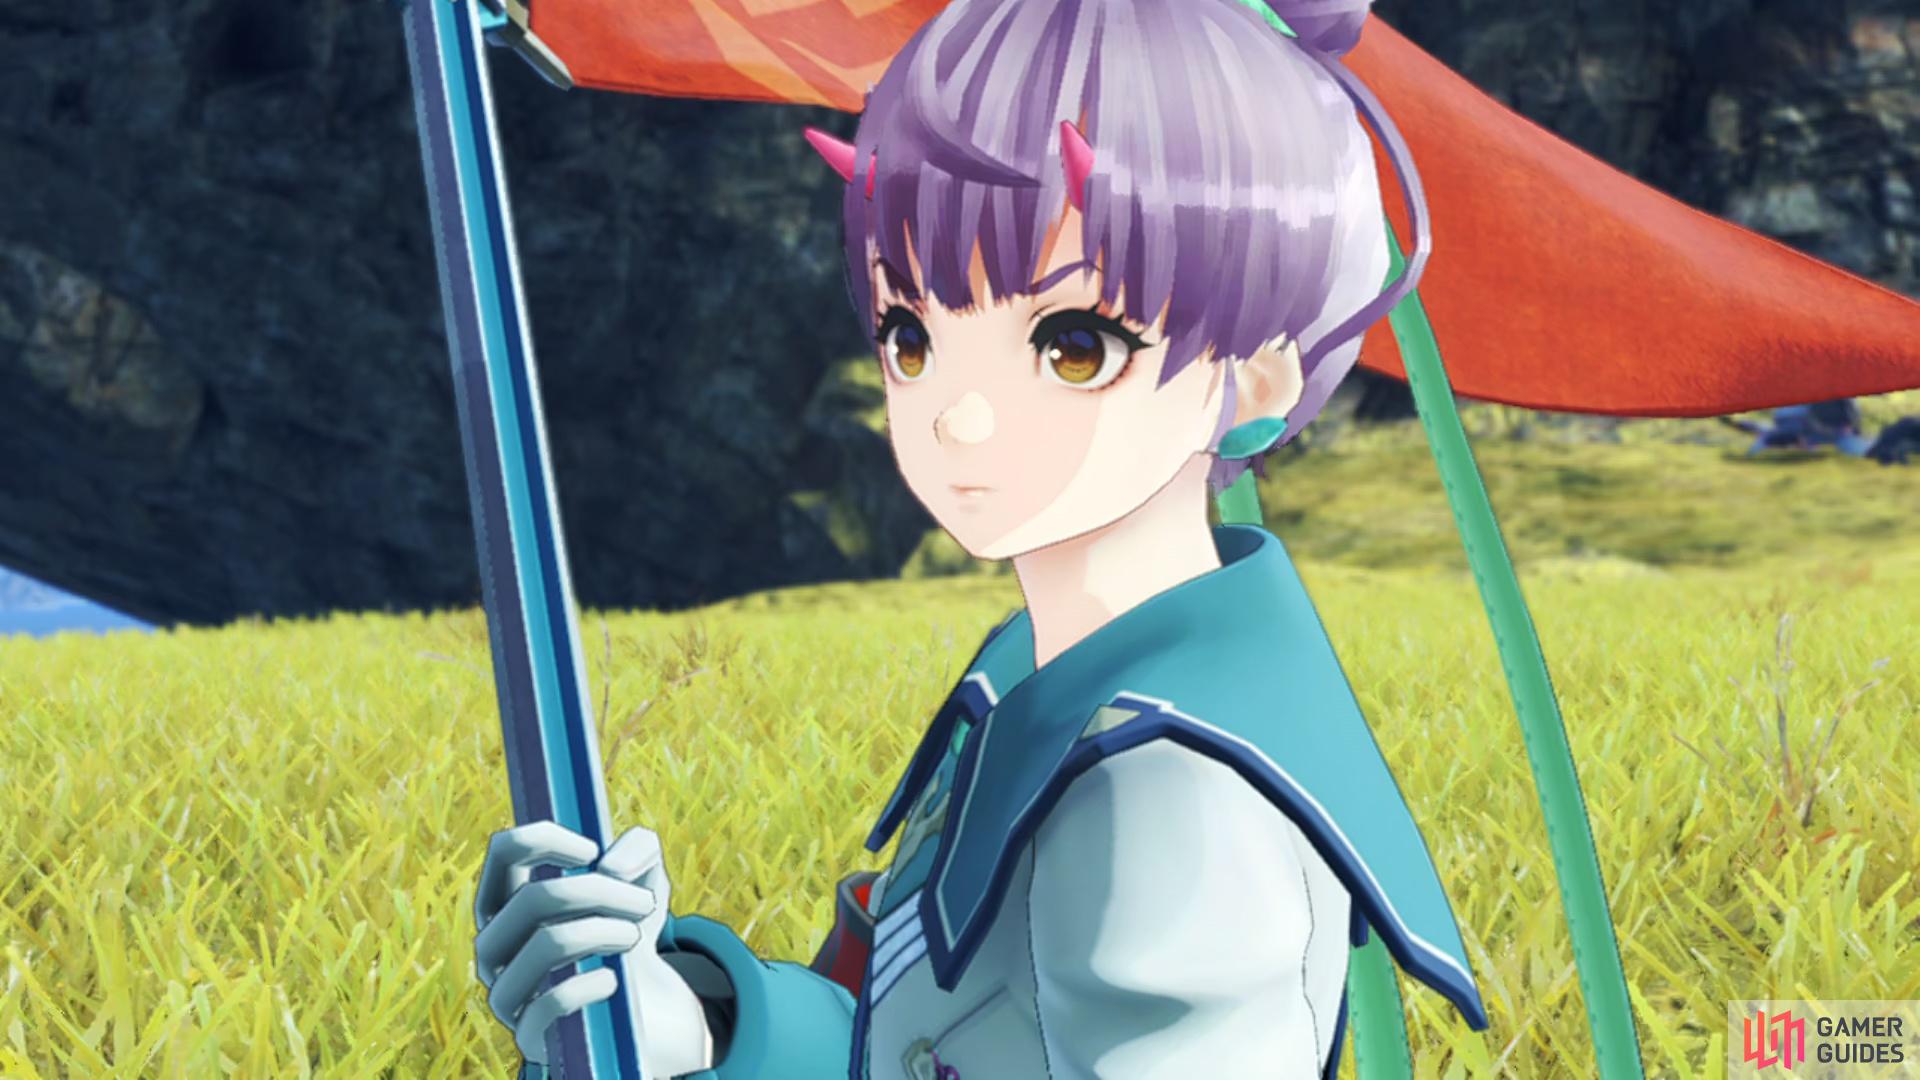 Transparent Dreams is Fiona’s Hero Quest in Chapter 5 of Xenoblade Chronicles 3.